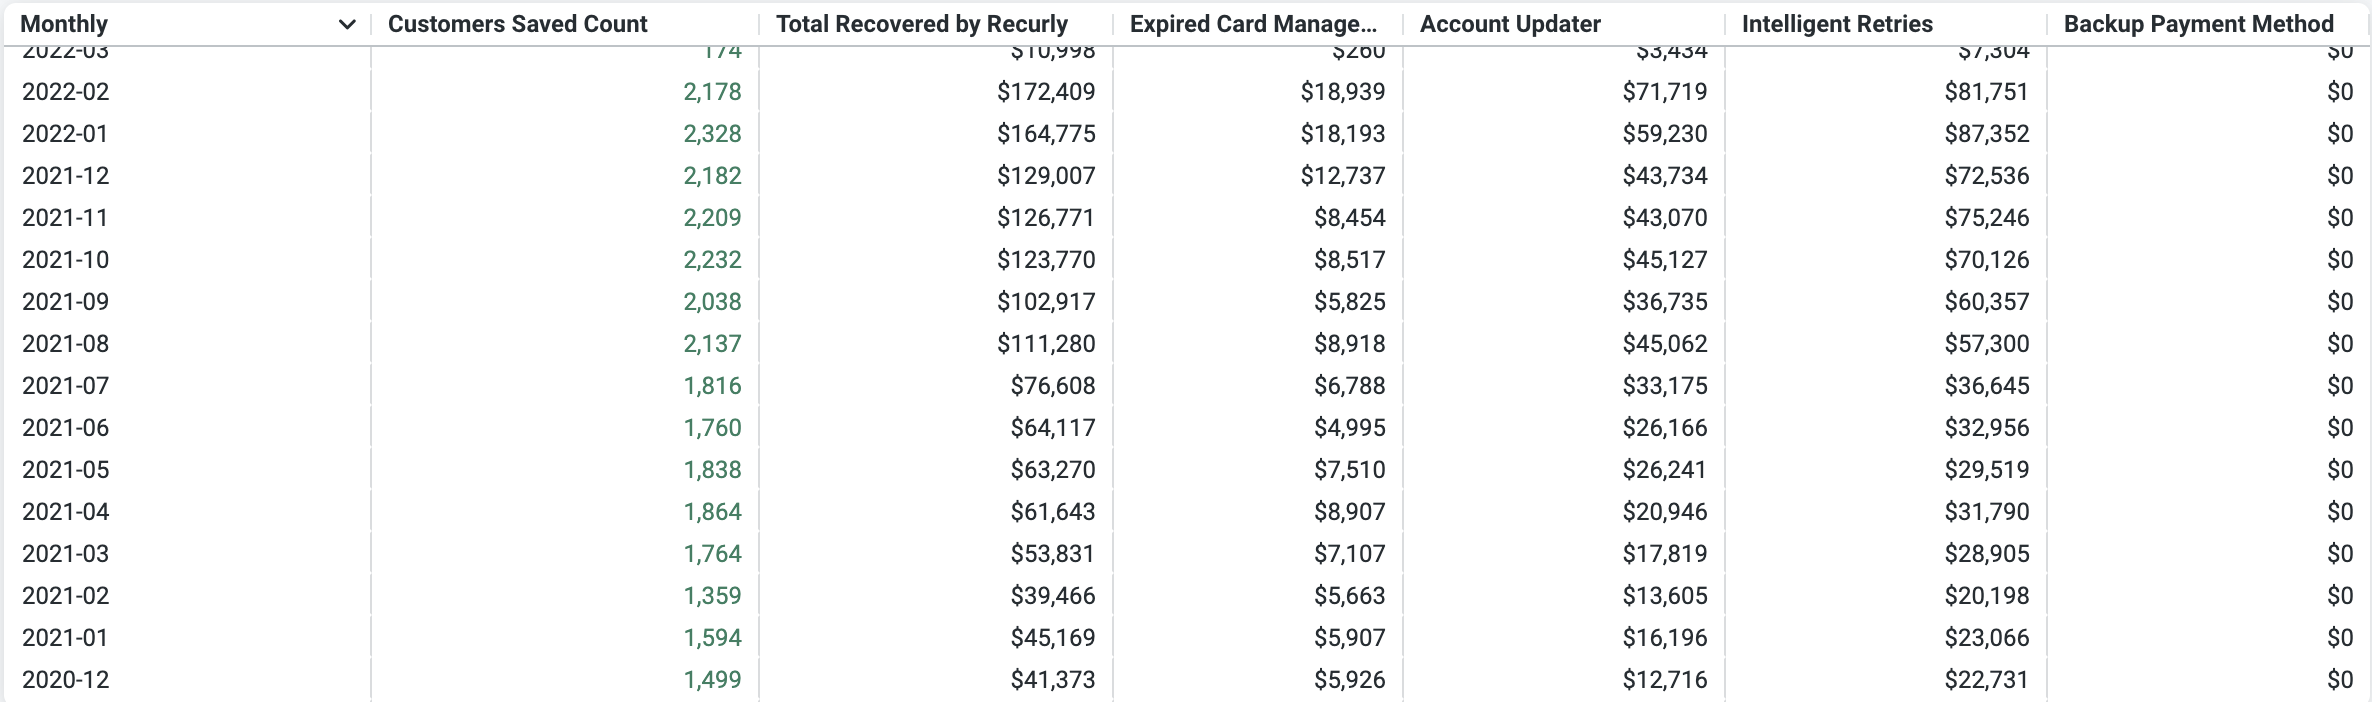 Details of Recovered Revenue